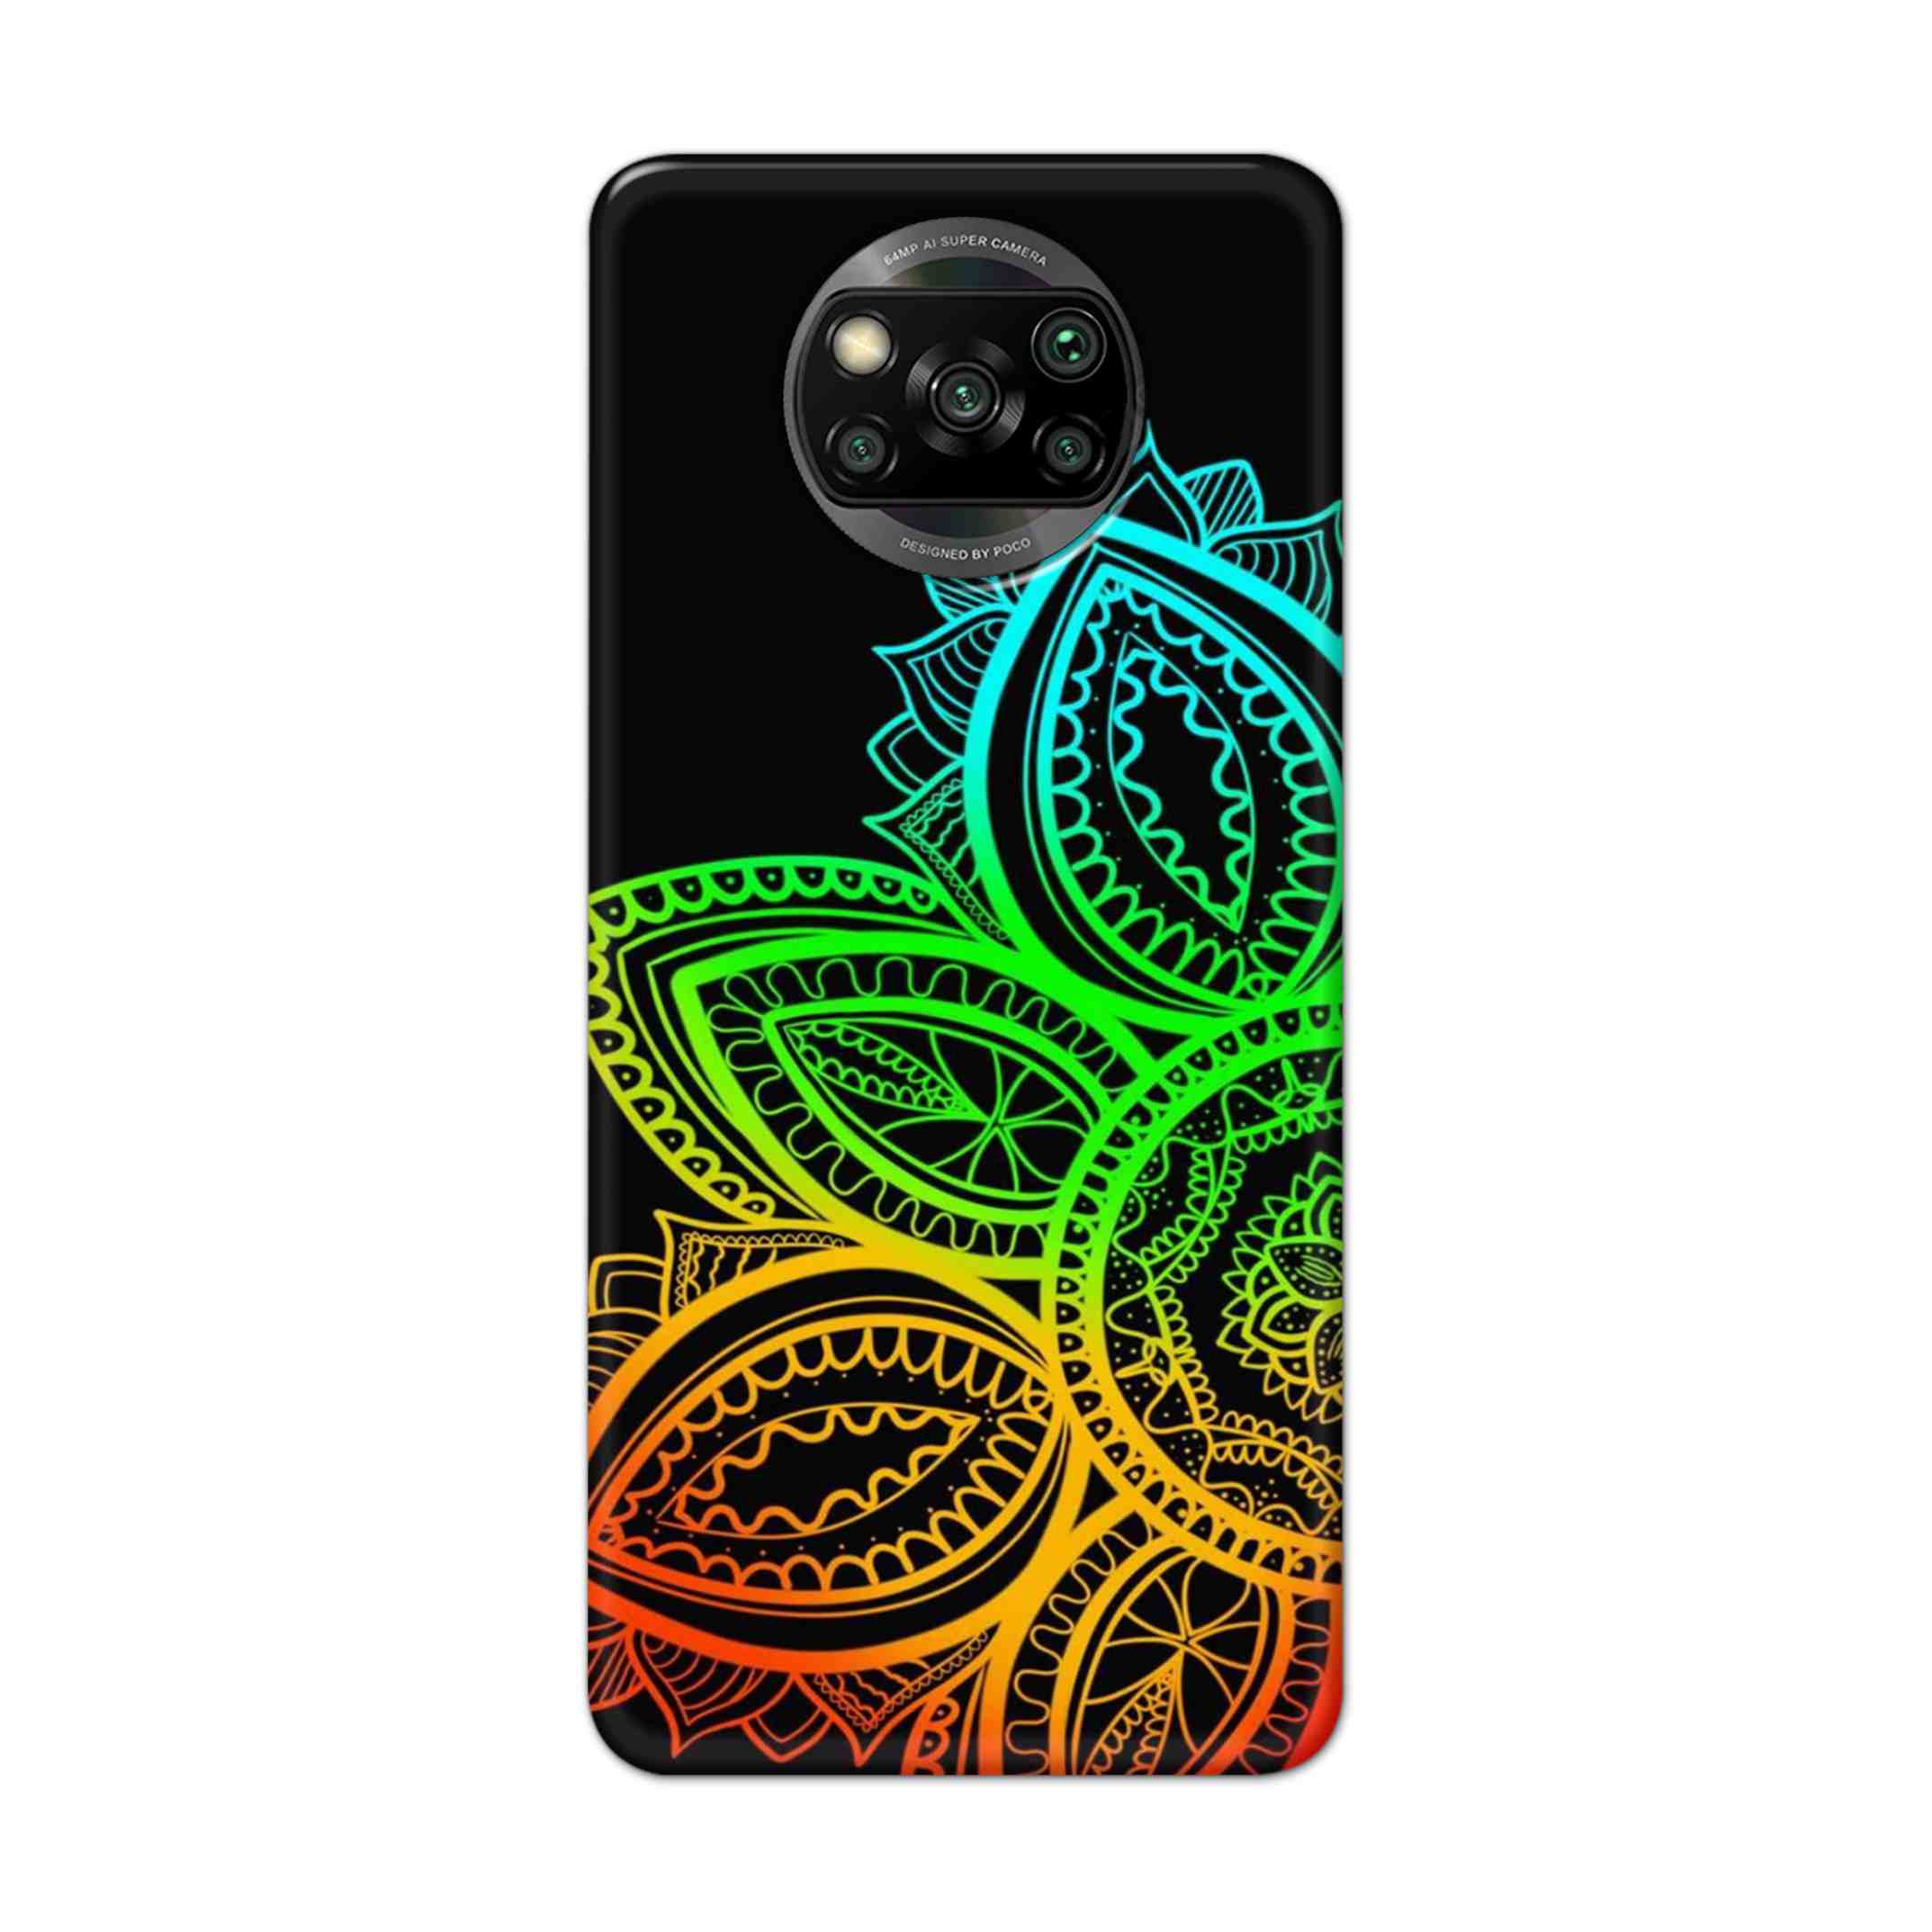 Buy Neon Mandala Hard Back Mobile Phone Case Cover For Pcoc X3 NFC Online